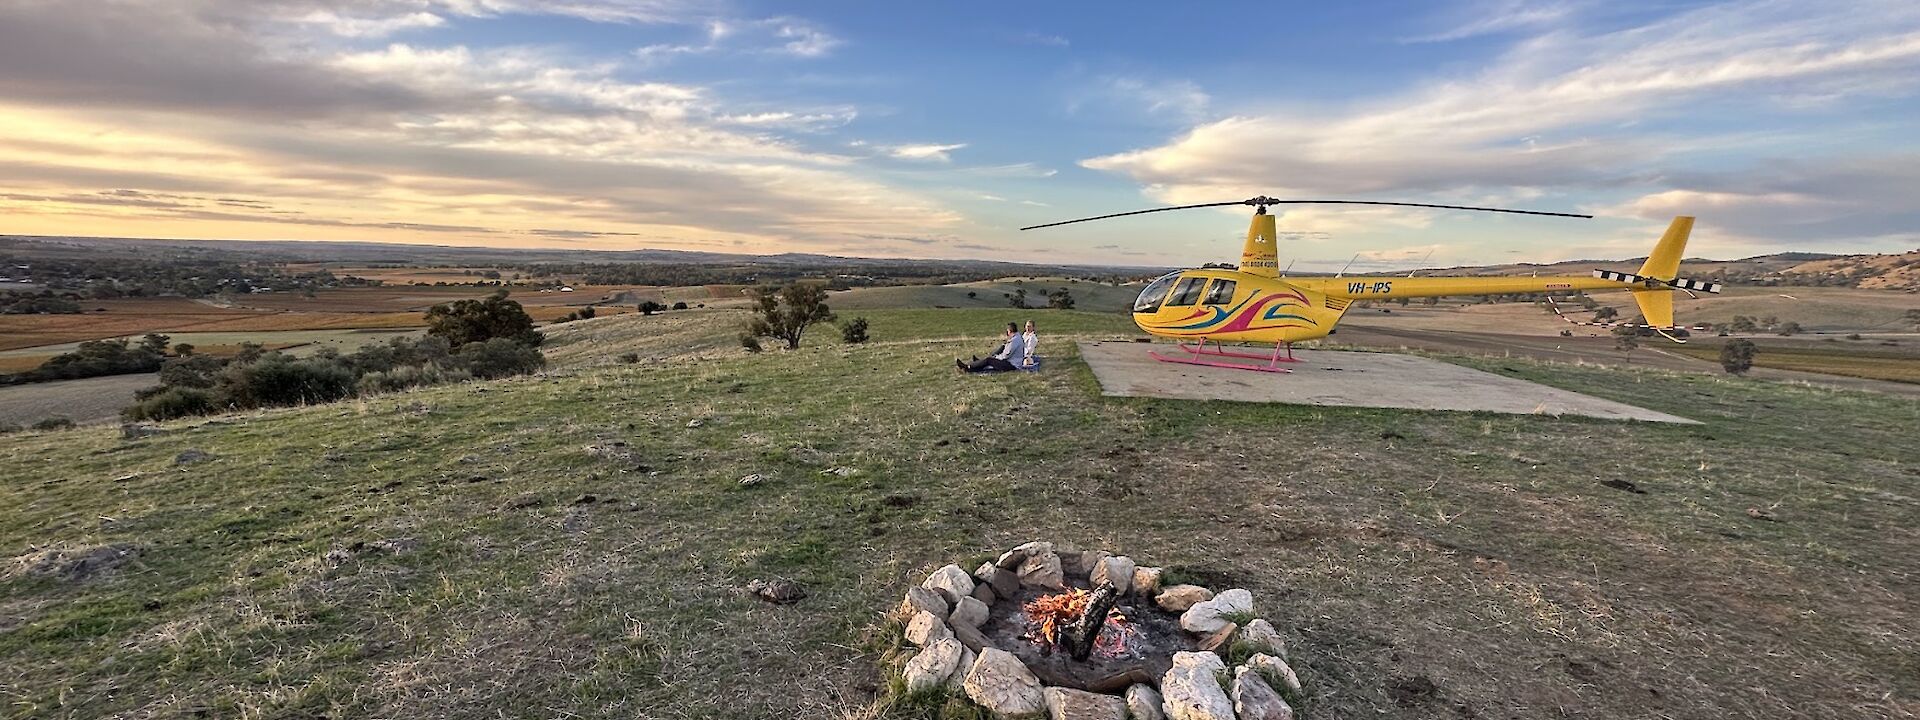 Picnic on top of the hill, Barossa Valley, Australia. CC:Barossa Helicopters